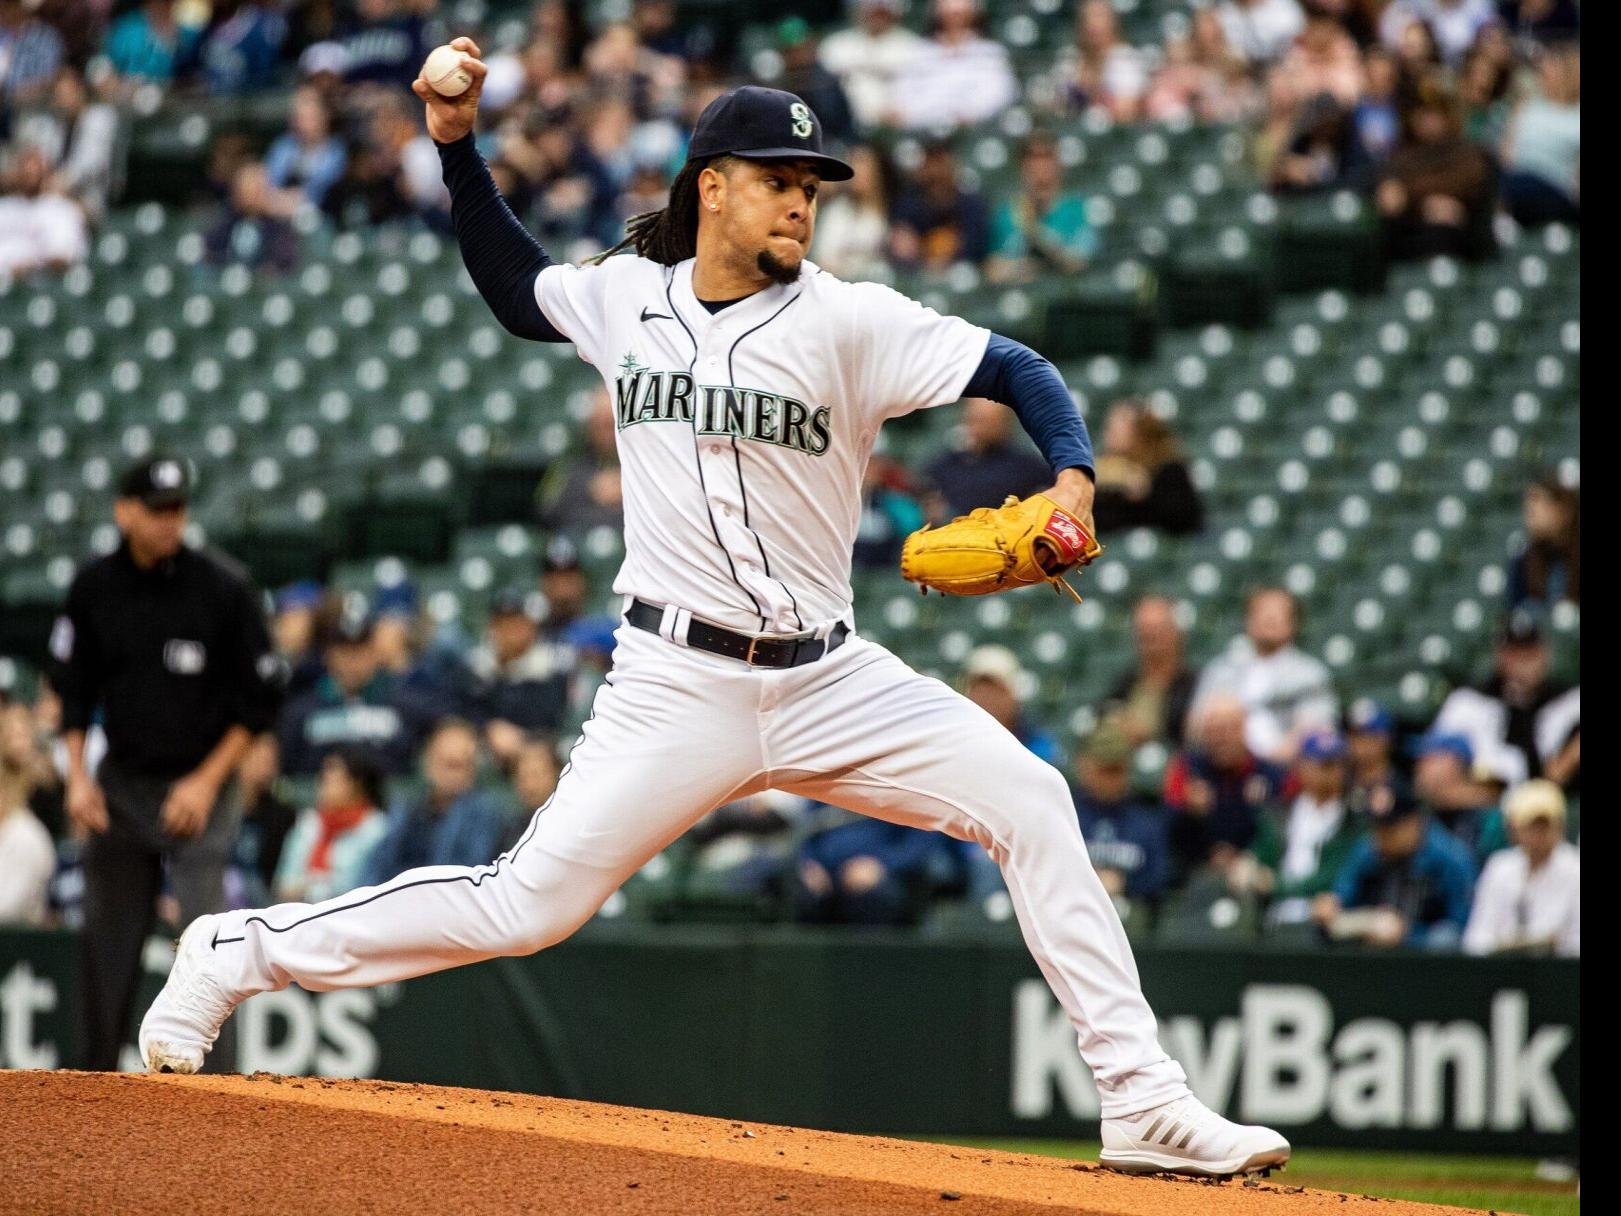 Luis Castillo lone Seattle Mariners player named 2023 MLB All-Star